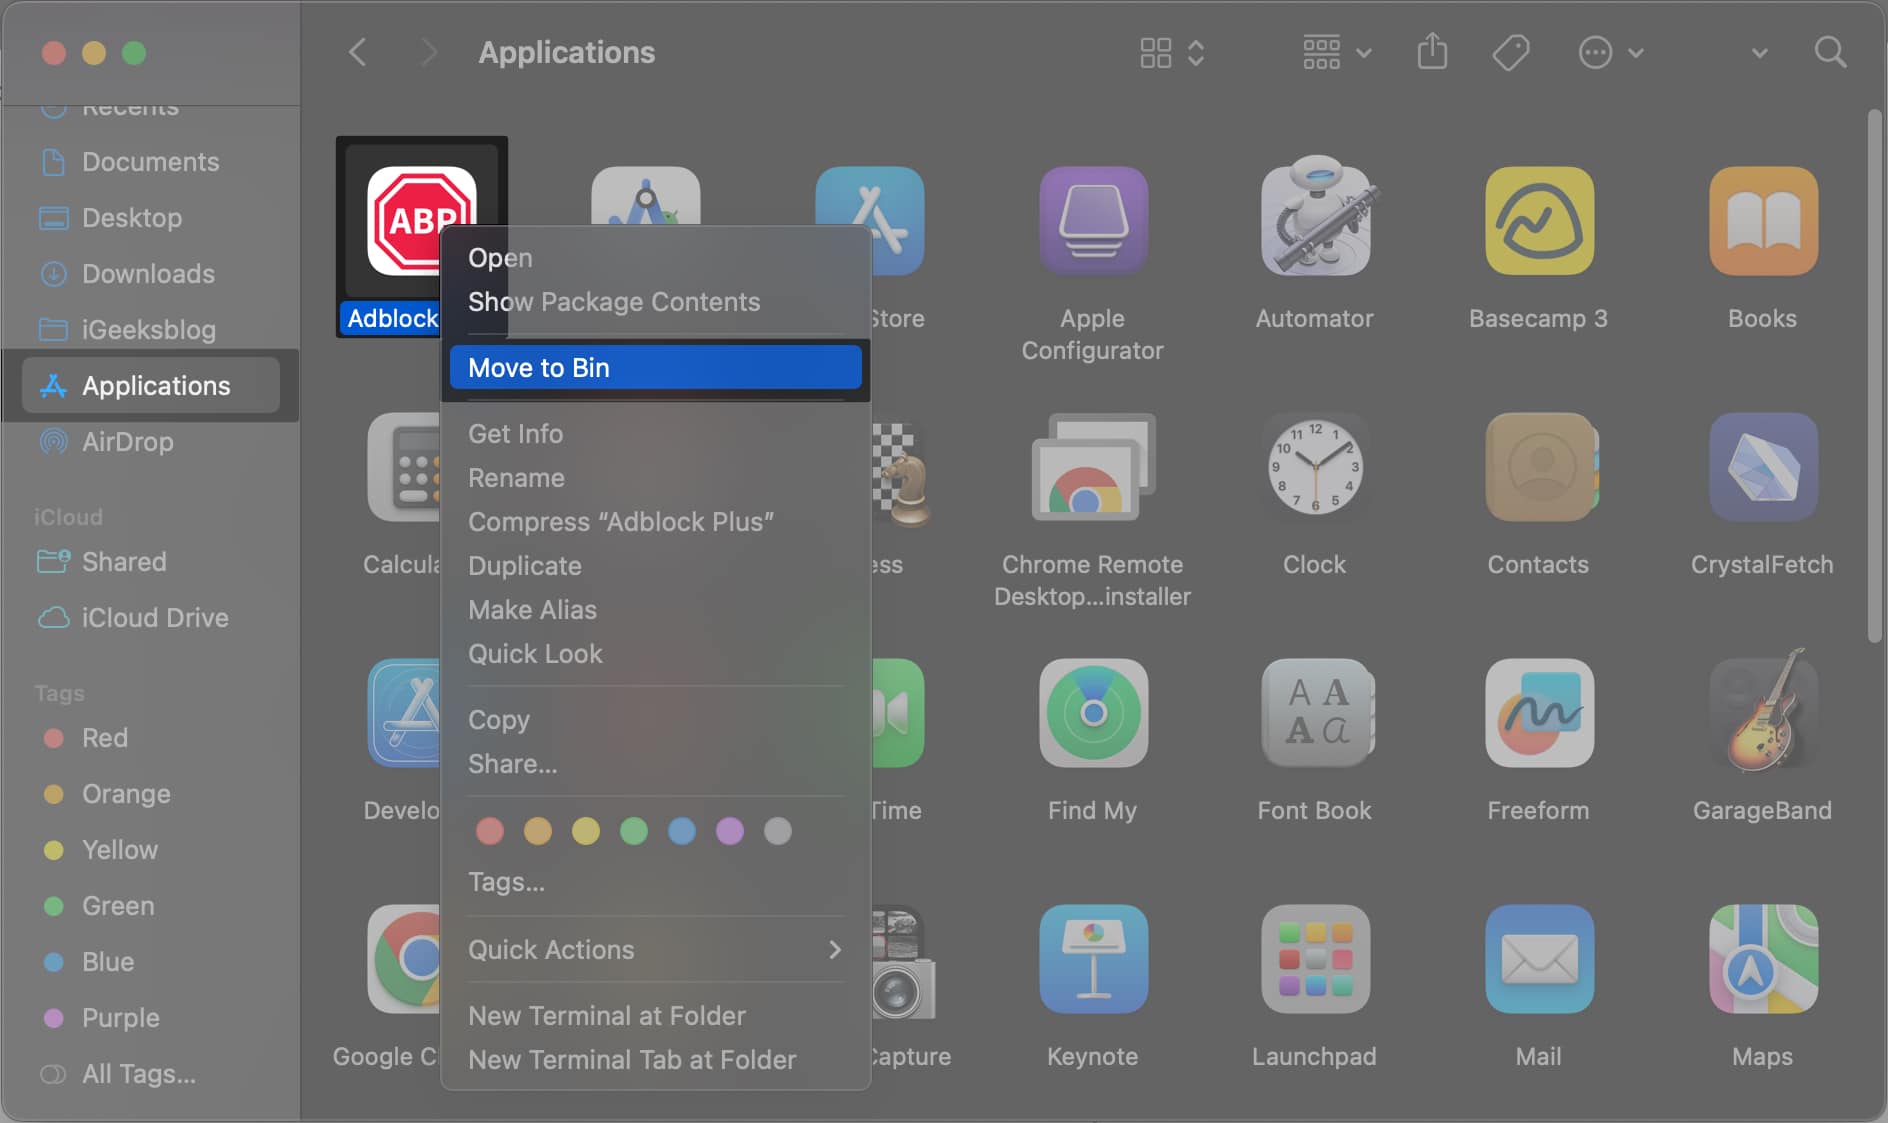 On your Mac, open Finder, Applications, select the Adblocker app, right-click and select Move to Bin